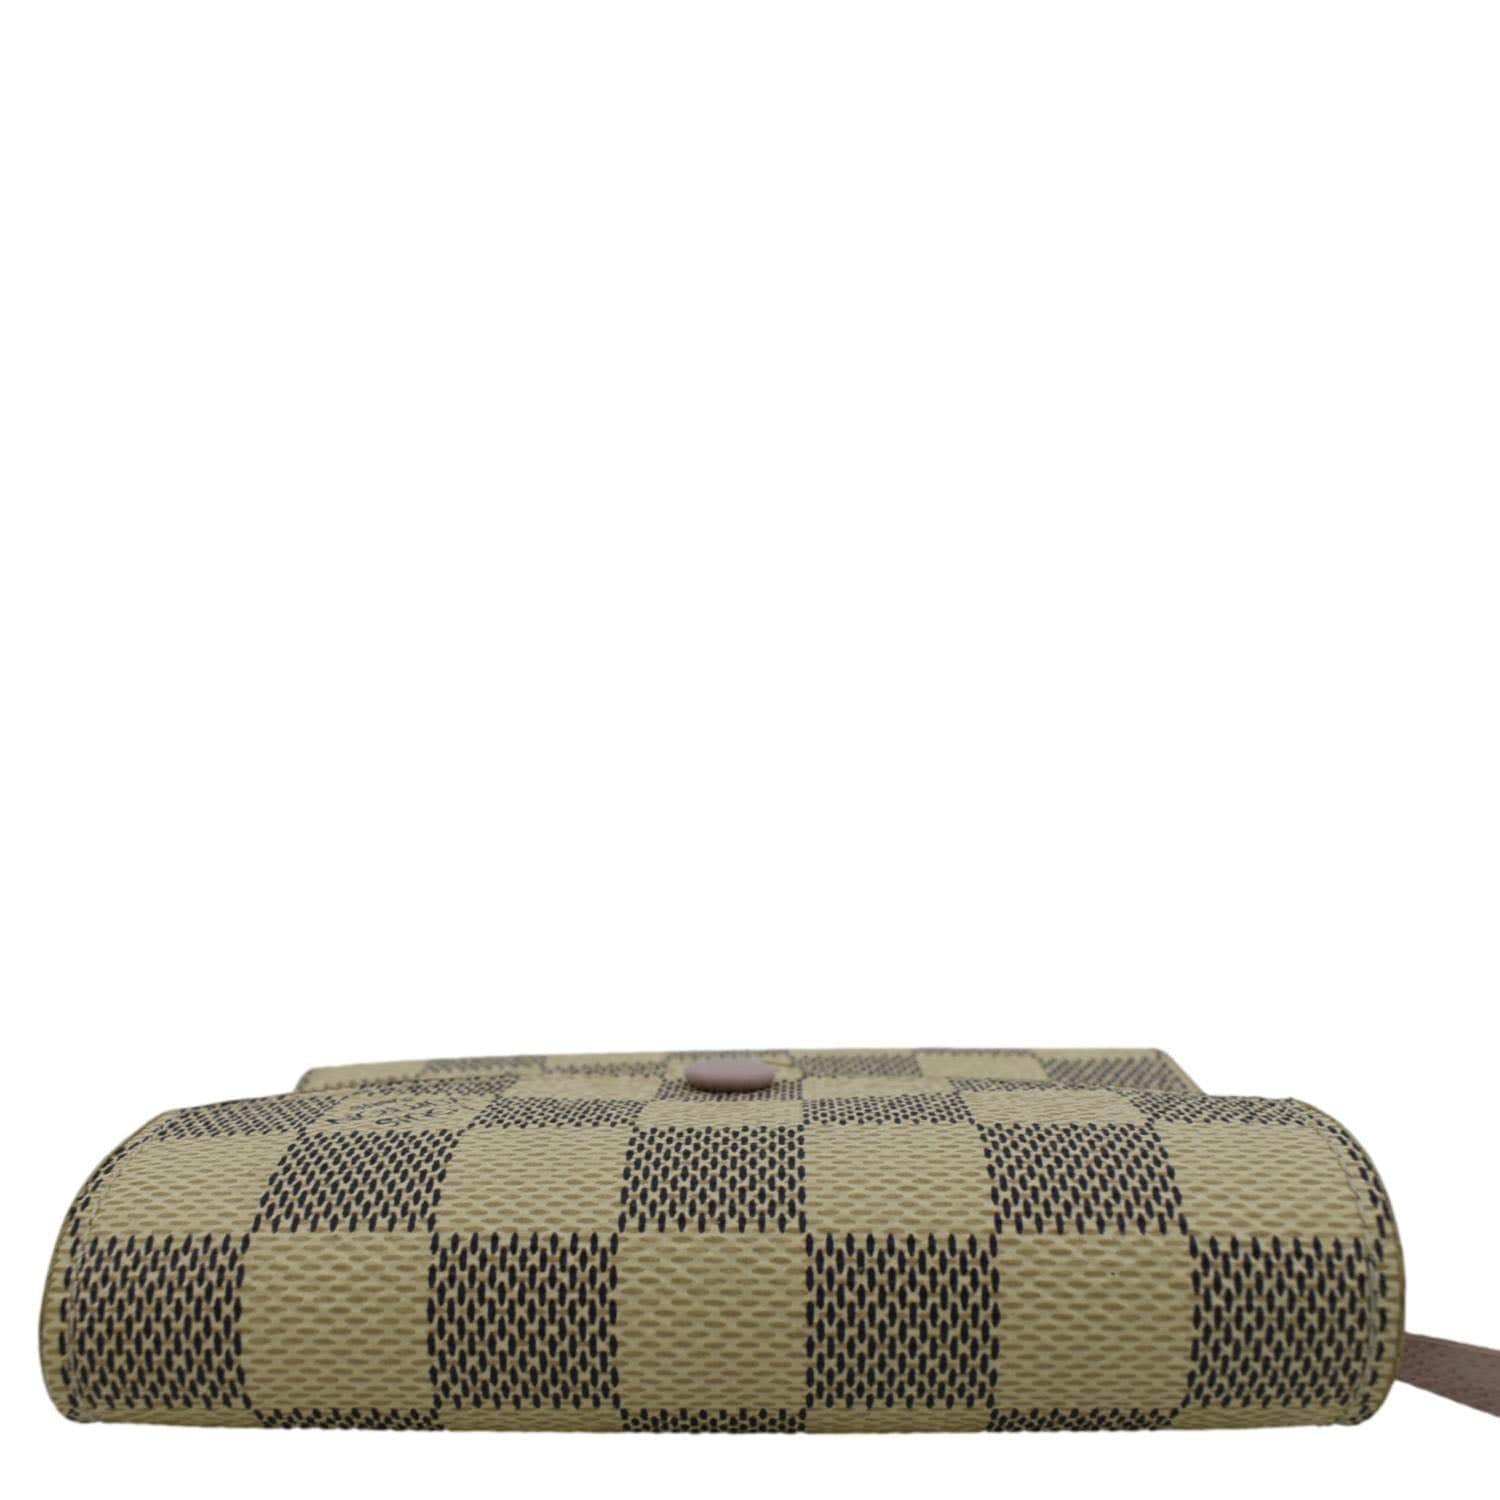 Louis Vuitton Daily Card Holder Damier Azur Rose Ballerine in Coated Canvas  - US